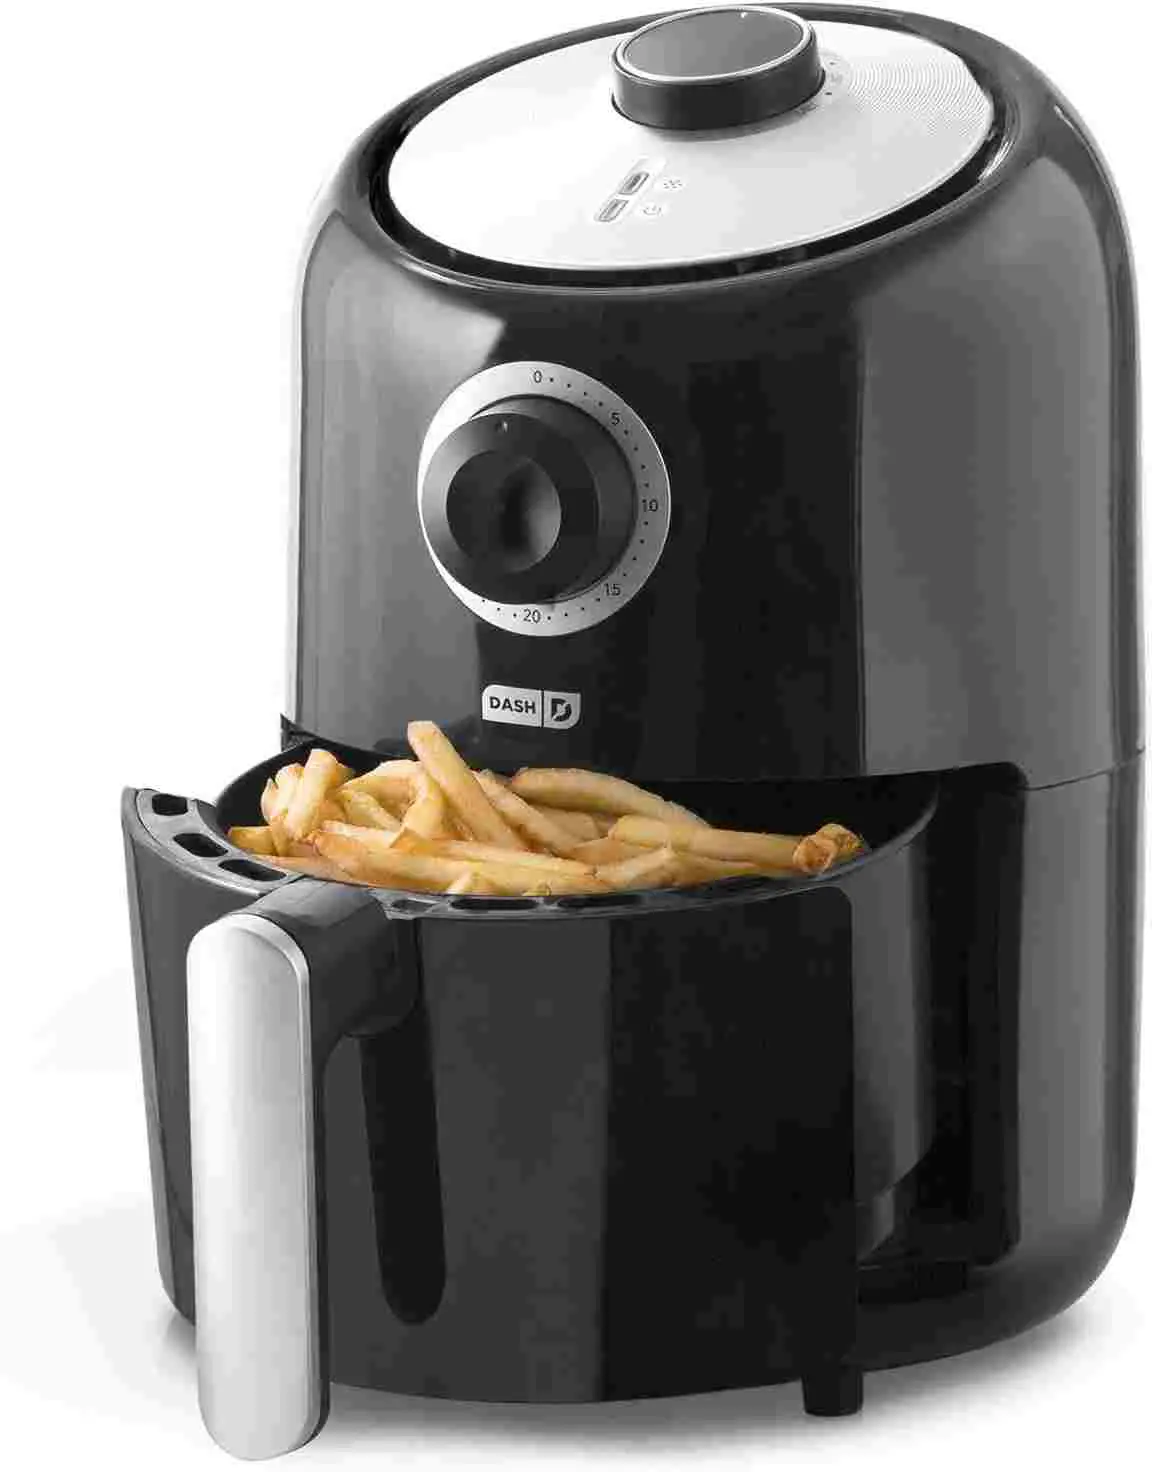 8 Best Air fryer Under $50 Reviews With Full Detailed ...